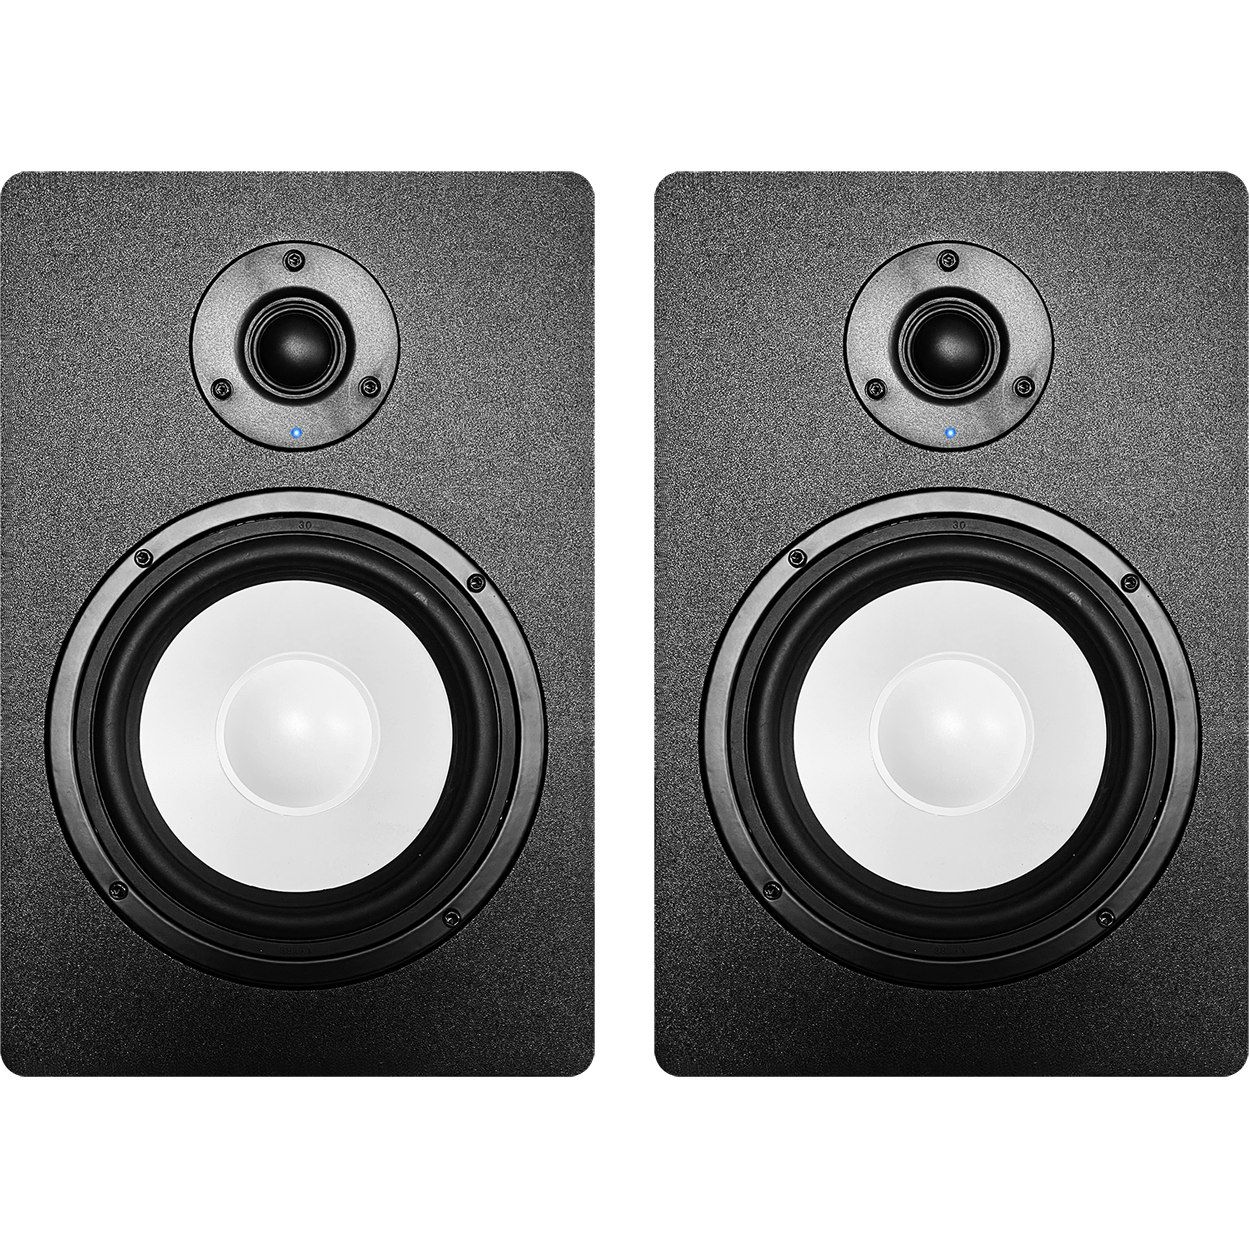 Axelvox PM-6A set of 2 pieces